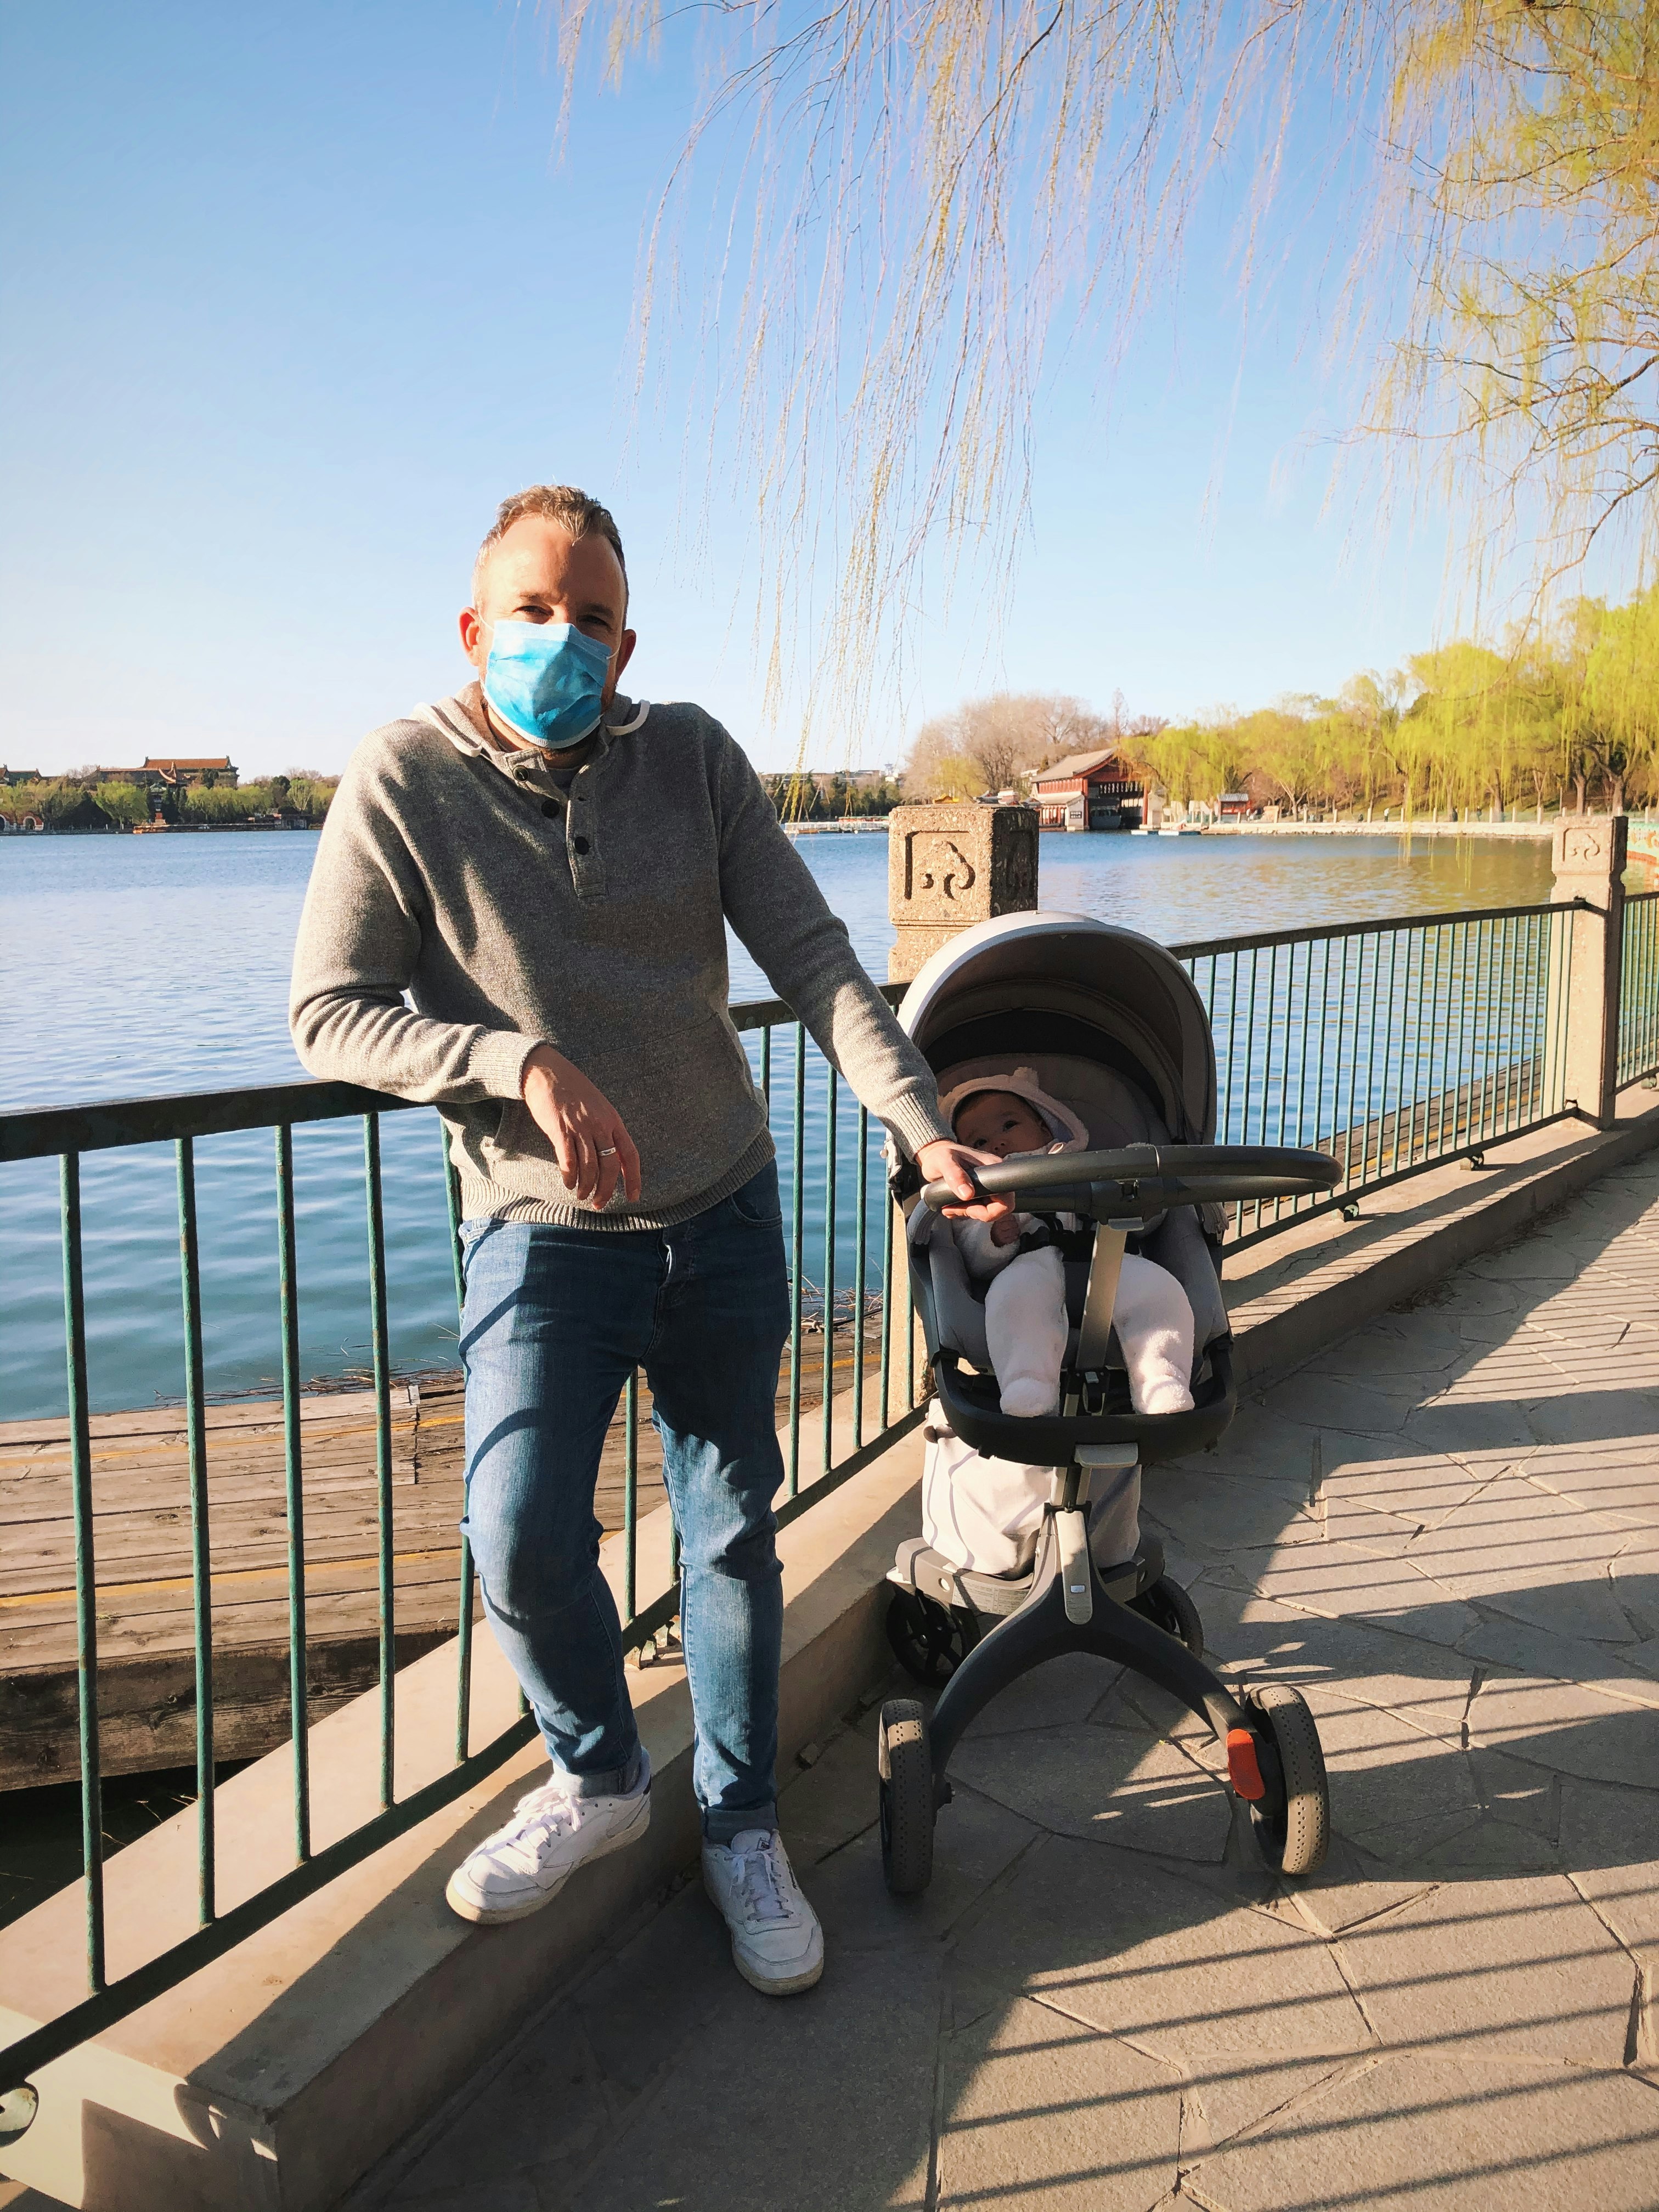 Tom O'Malley wearing a face mask in a park in Beijing with a pram next to him